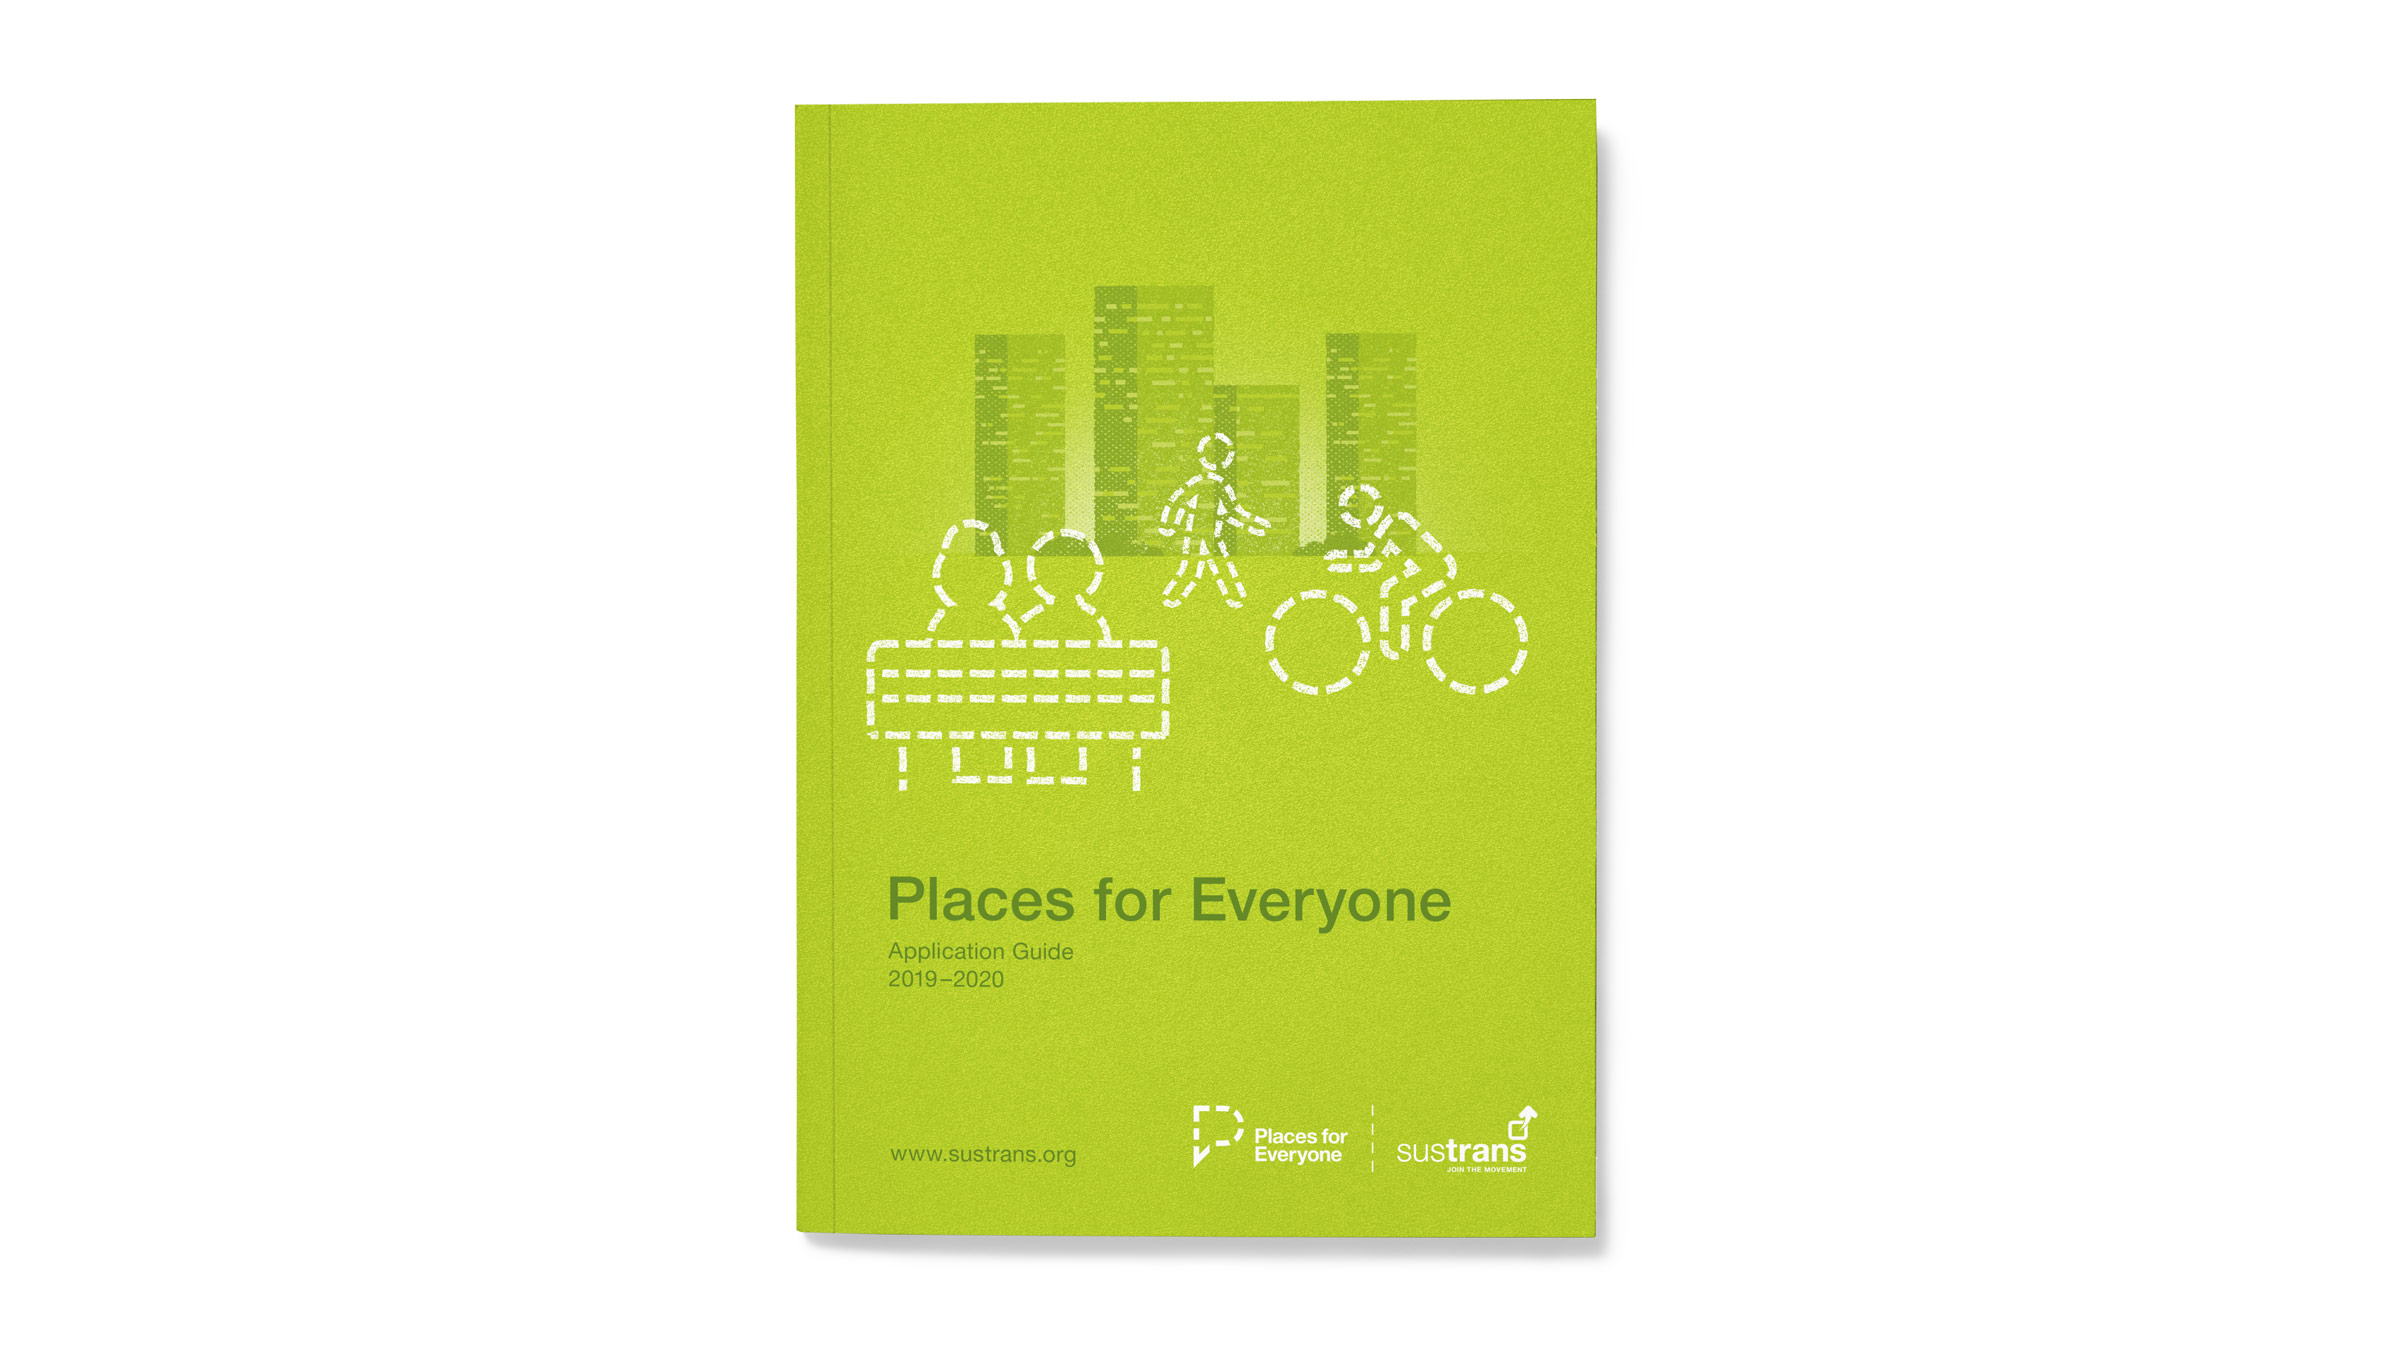 Sustrans Places for Everyone pplication guide designed by Monumentum Brands